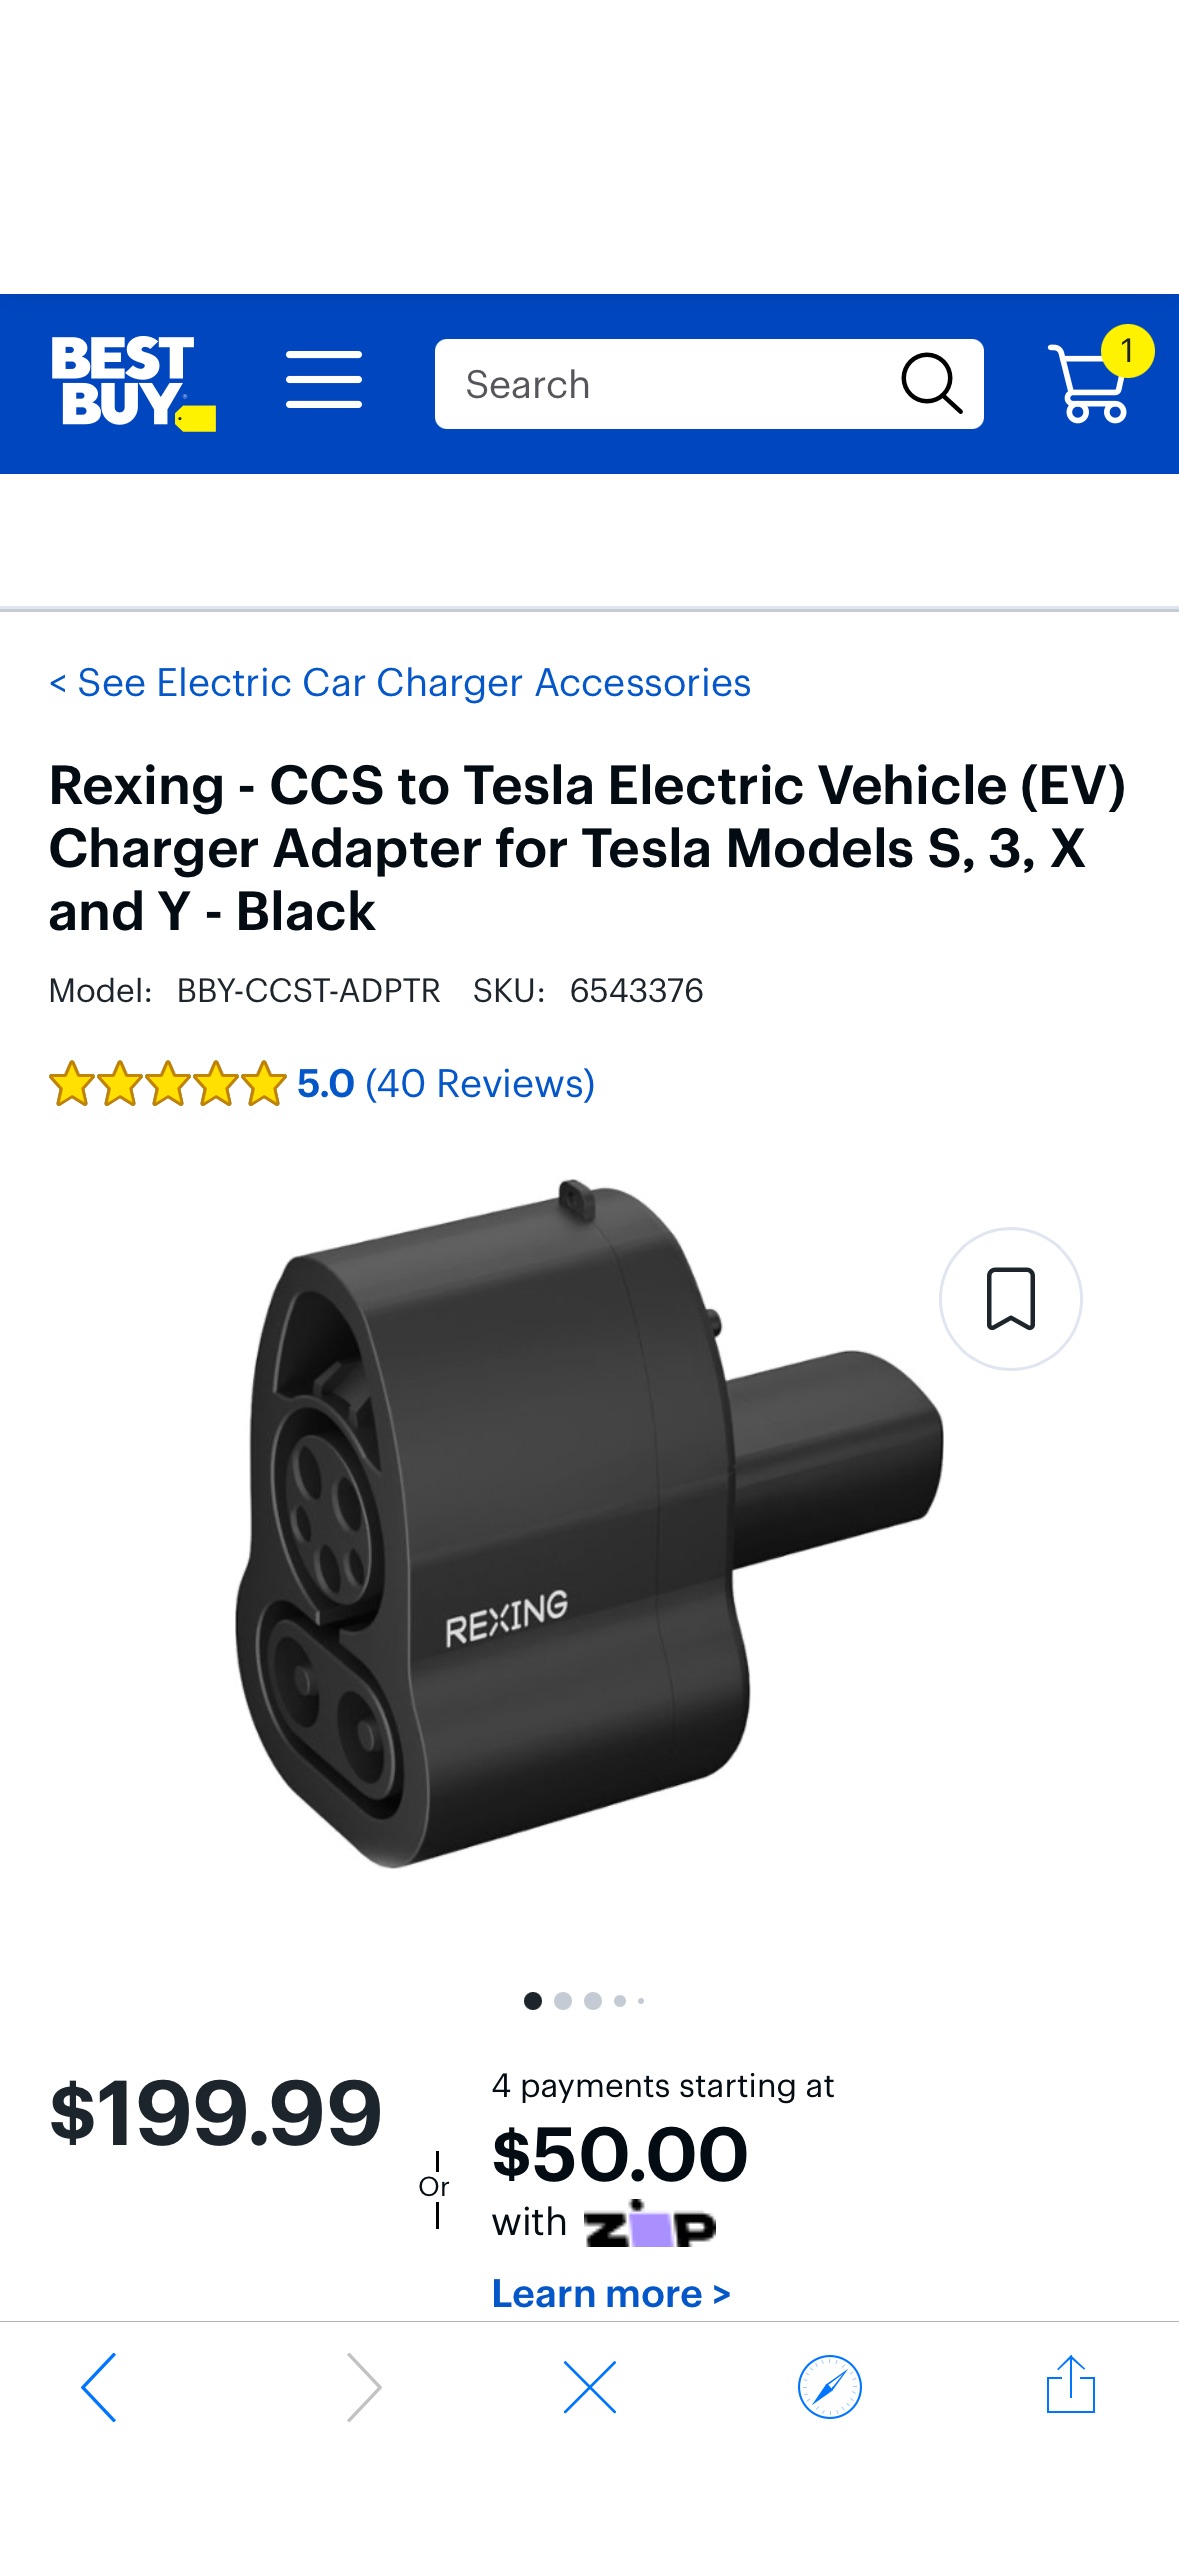 Rexing CCS to Tesla Electric Vehicle (EV) Charger Adapter for Tesla Models S, 3, X and Y Black BBY-CCST-ADPTR - Best Buy